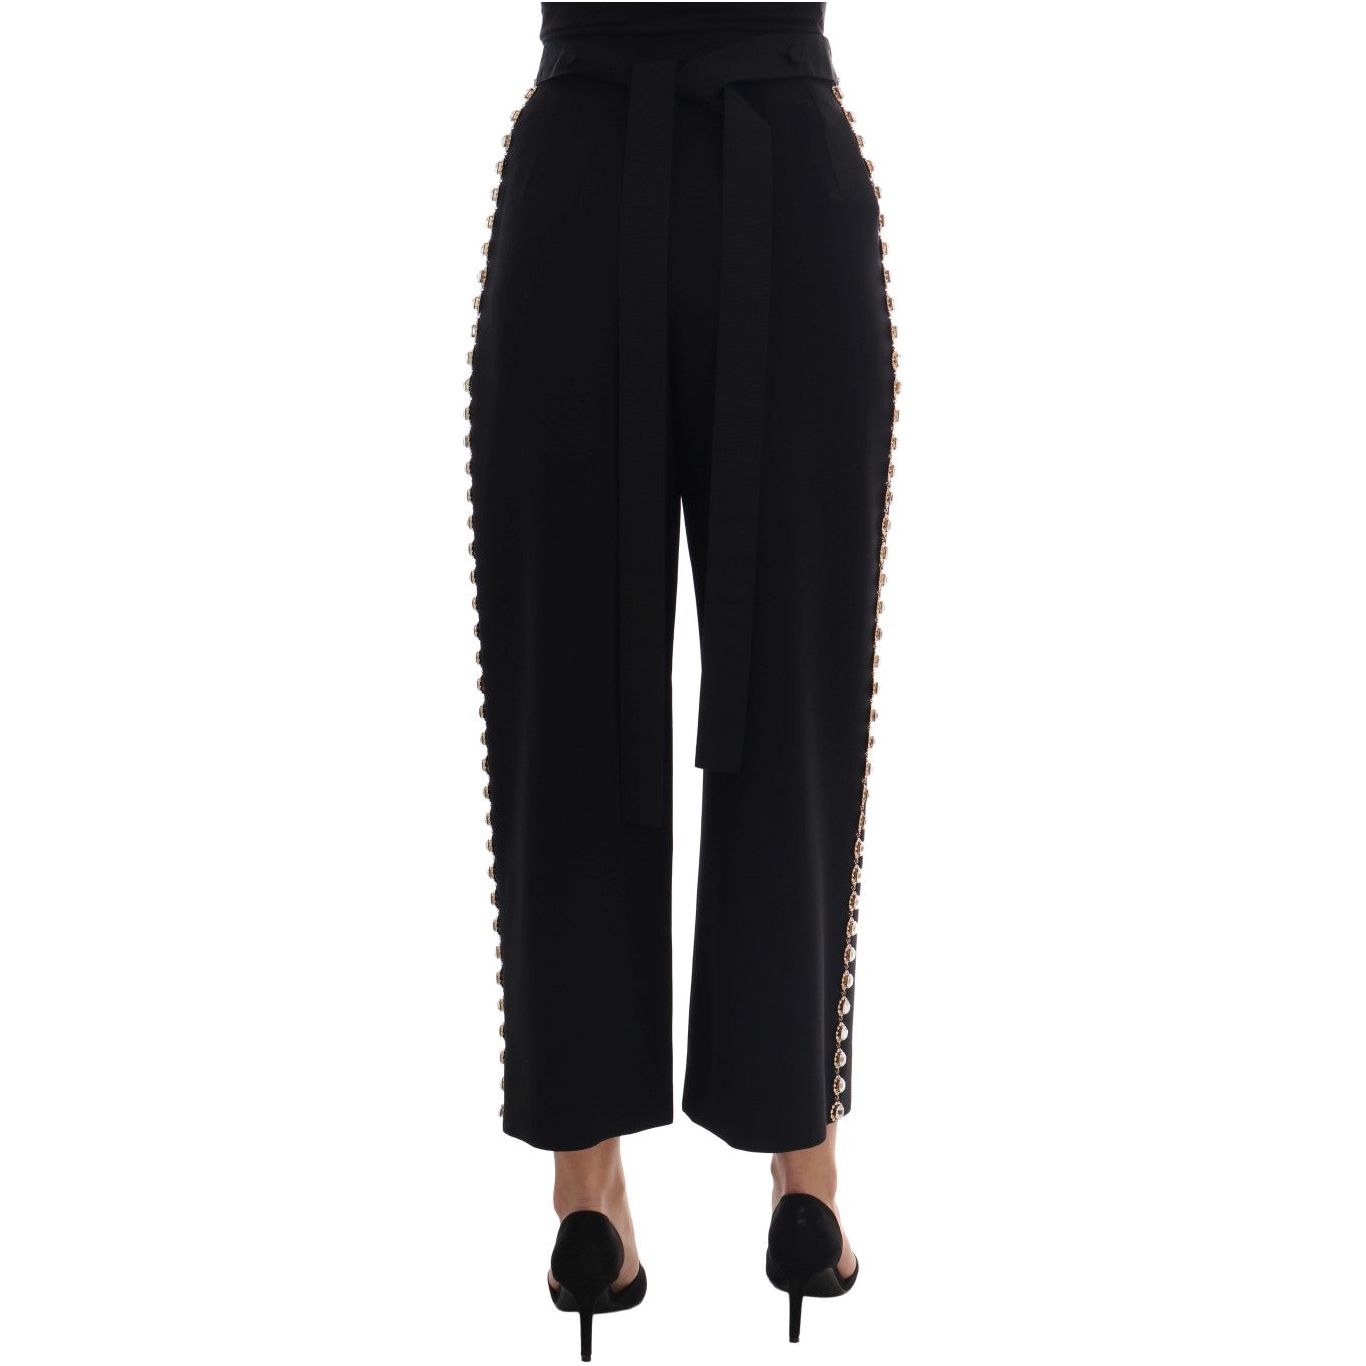 Dolce & Gabbana Elegant High-Waist Ankle Pants with Gold Detailing black-wool-stretch-crystal-pants Jeans & Pants 513120-black-wool-stretch-crystal-pants-2.jpg